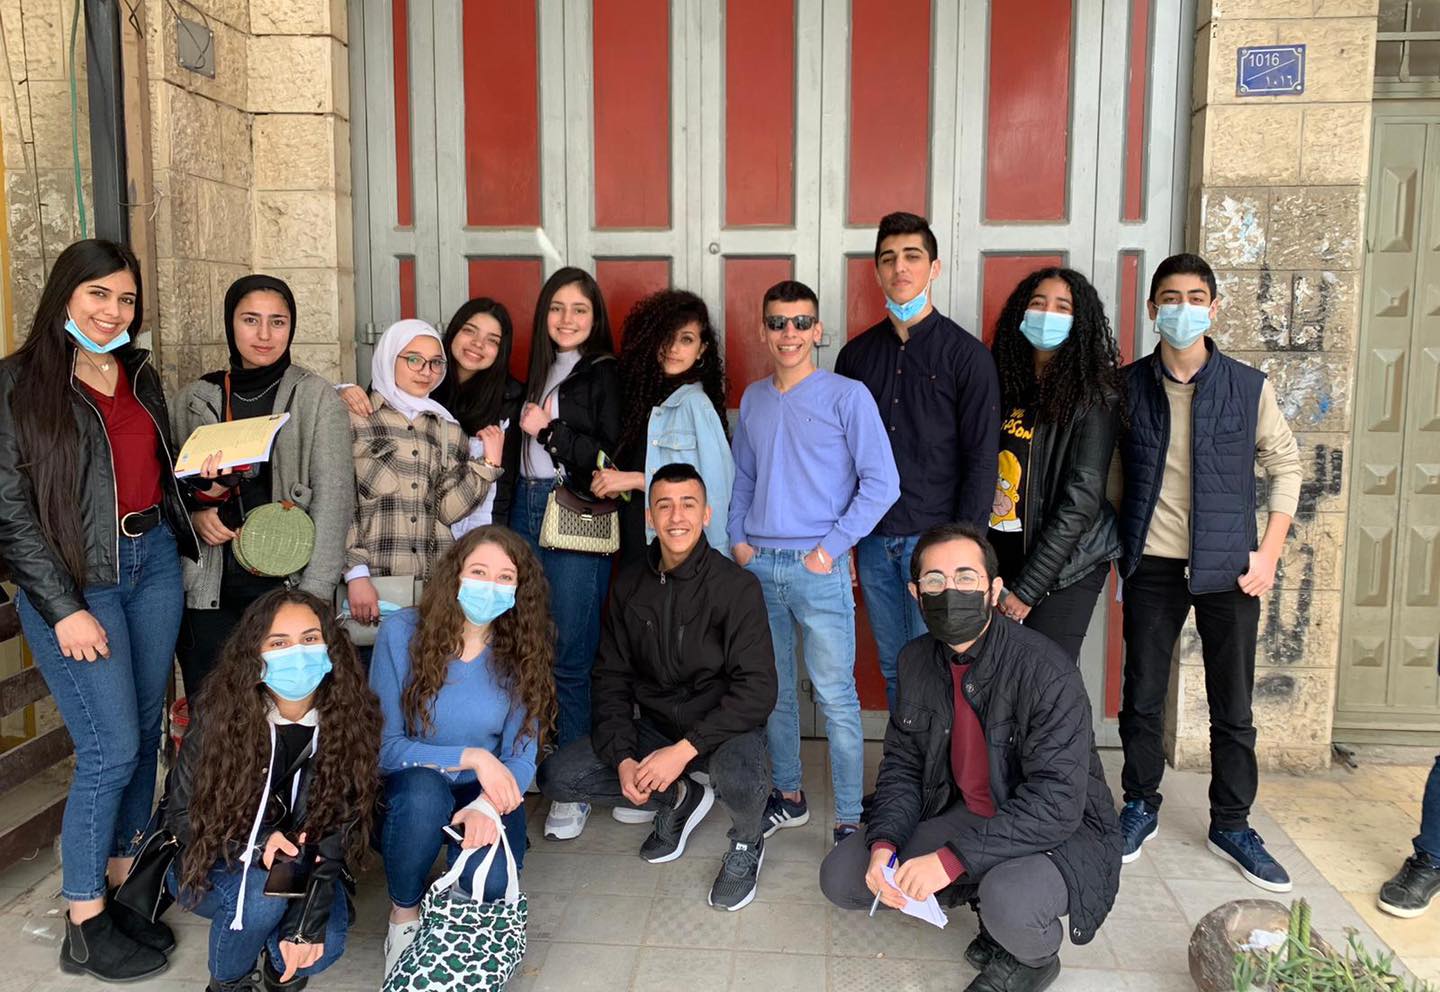 Shoruq Organization sets up the first Debate Club in Dheisheh Refugee Camp in Bethlehem, as part of its Advocacy Program.